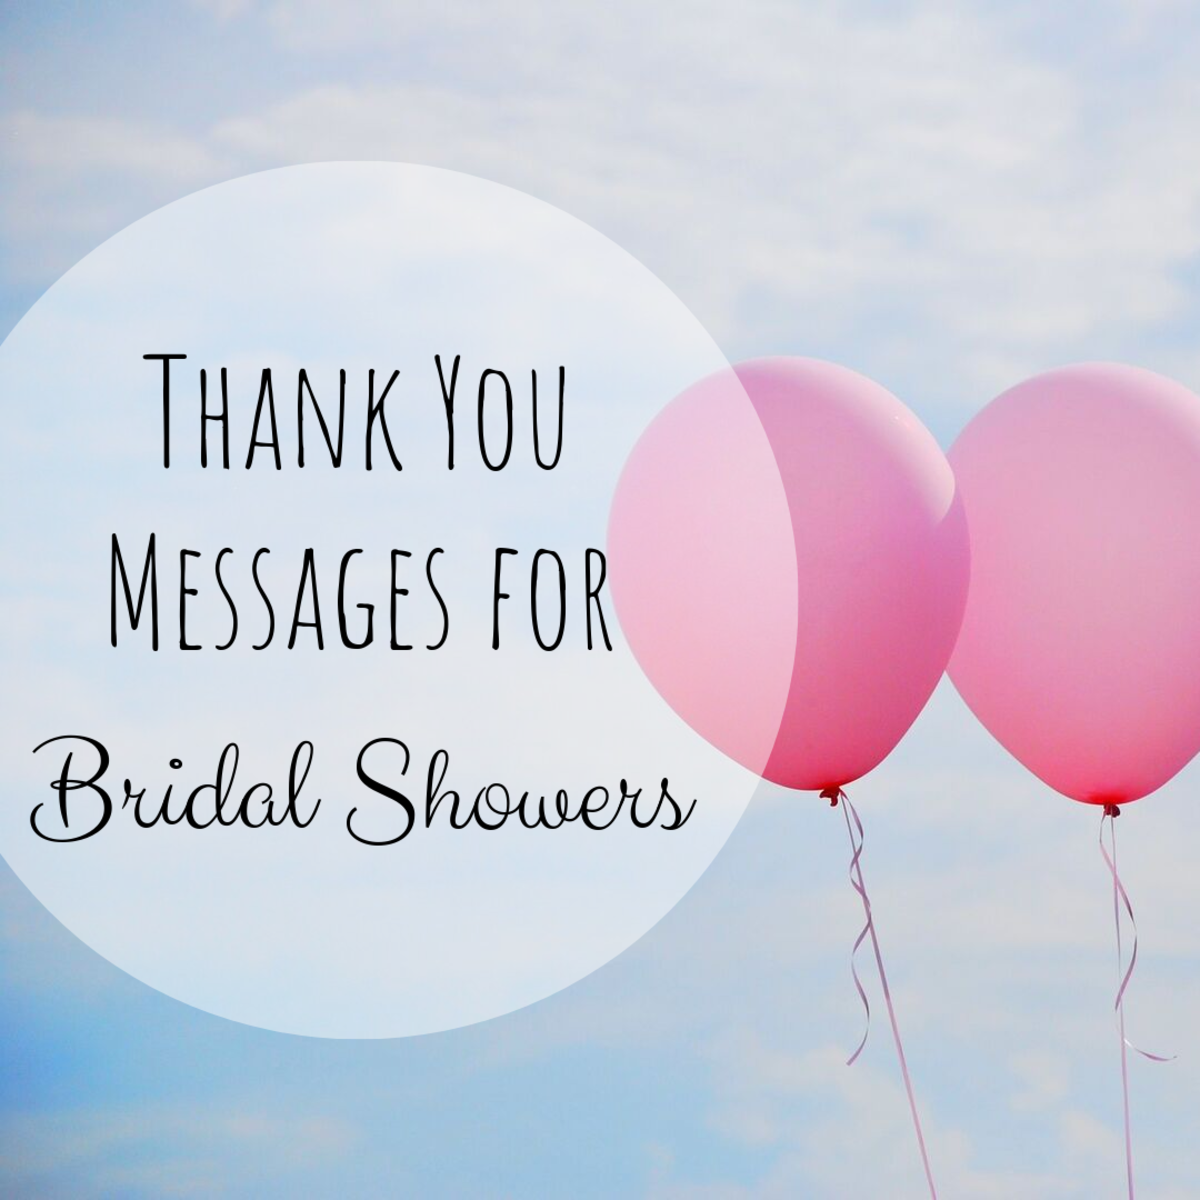 7 Wording Ideas For Your Wedding Thank You Cards